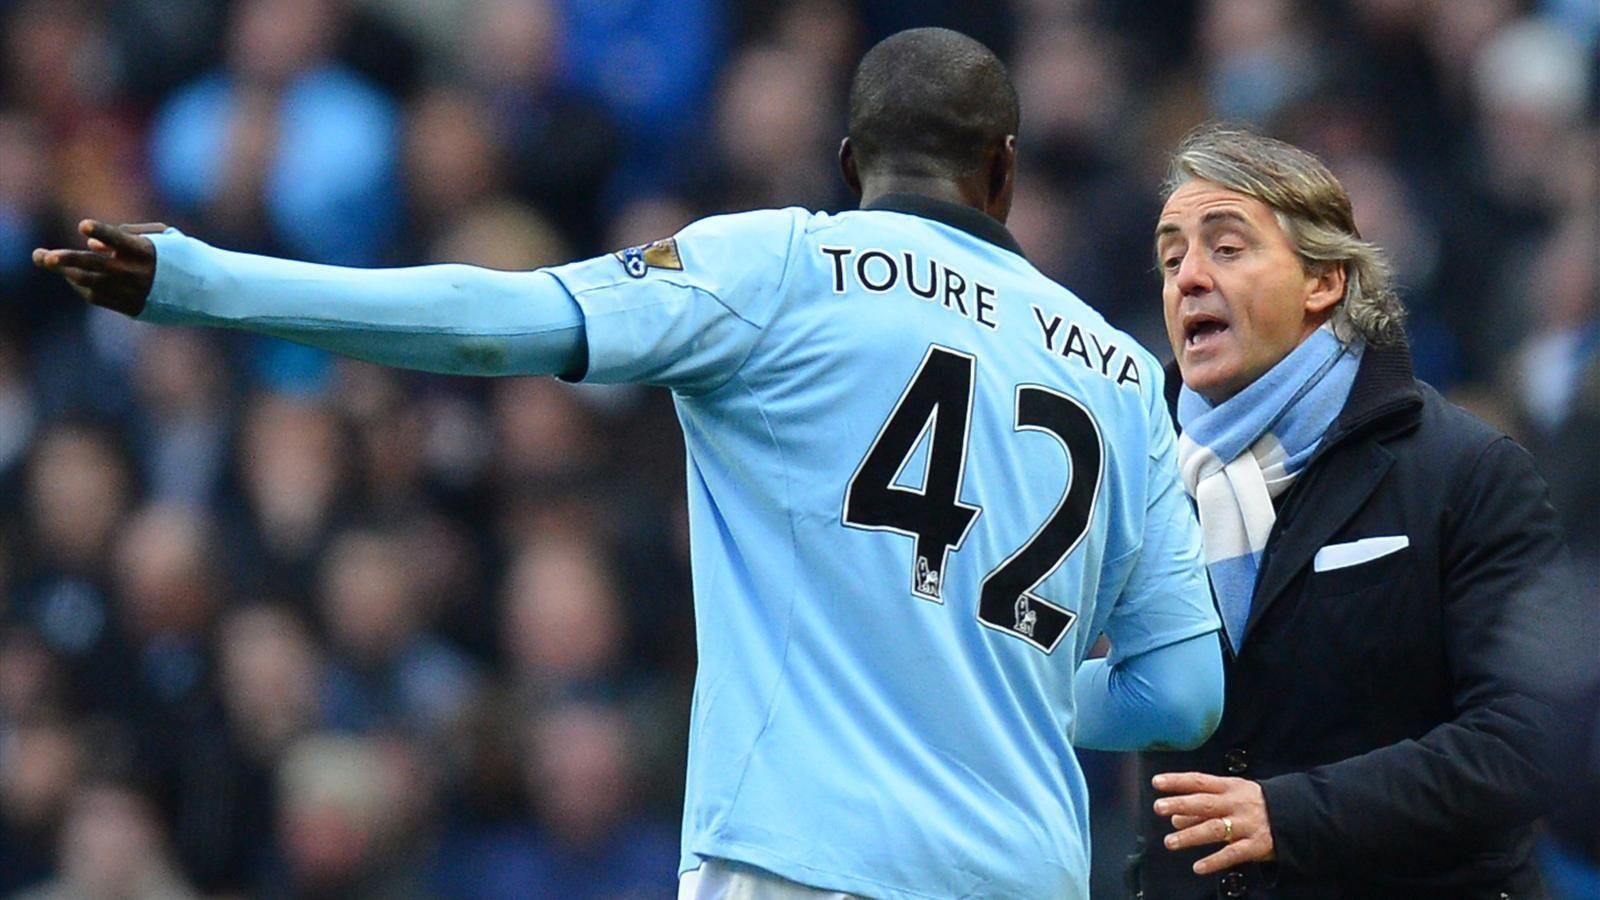 Robeto Mancini: signing Yaya Toure will be difficult A